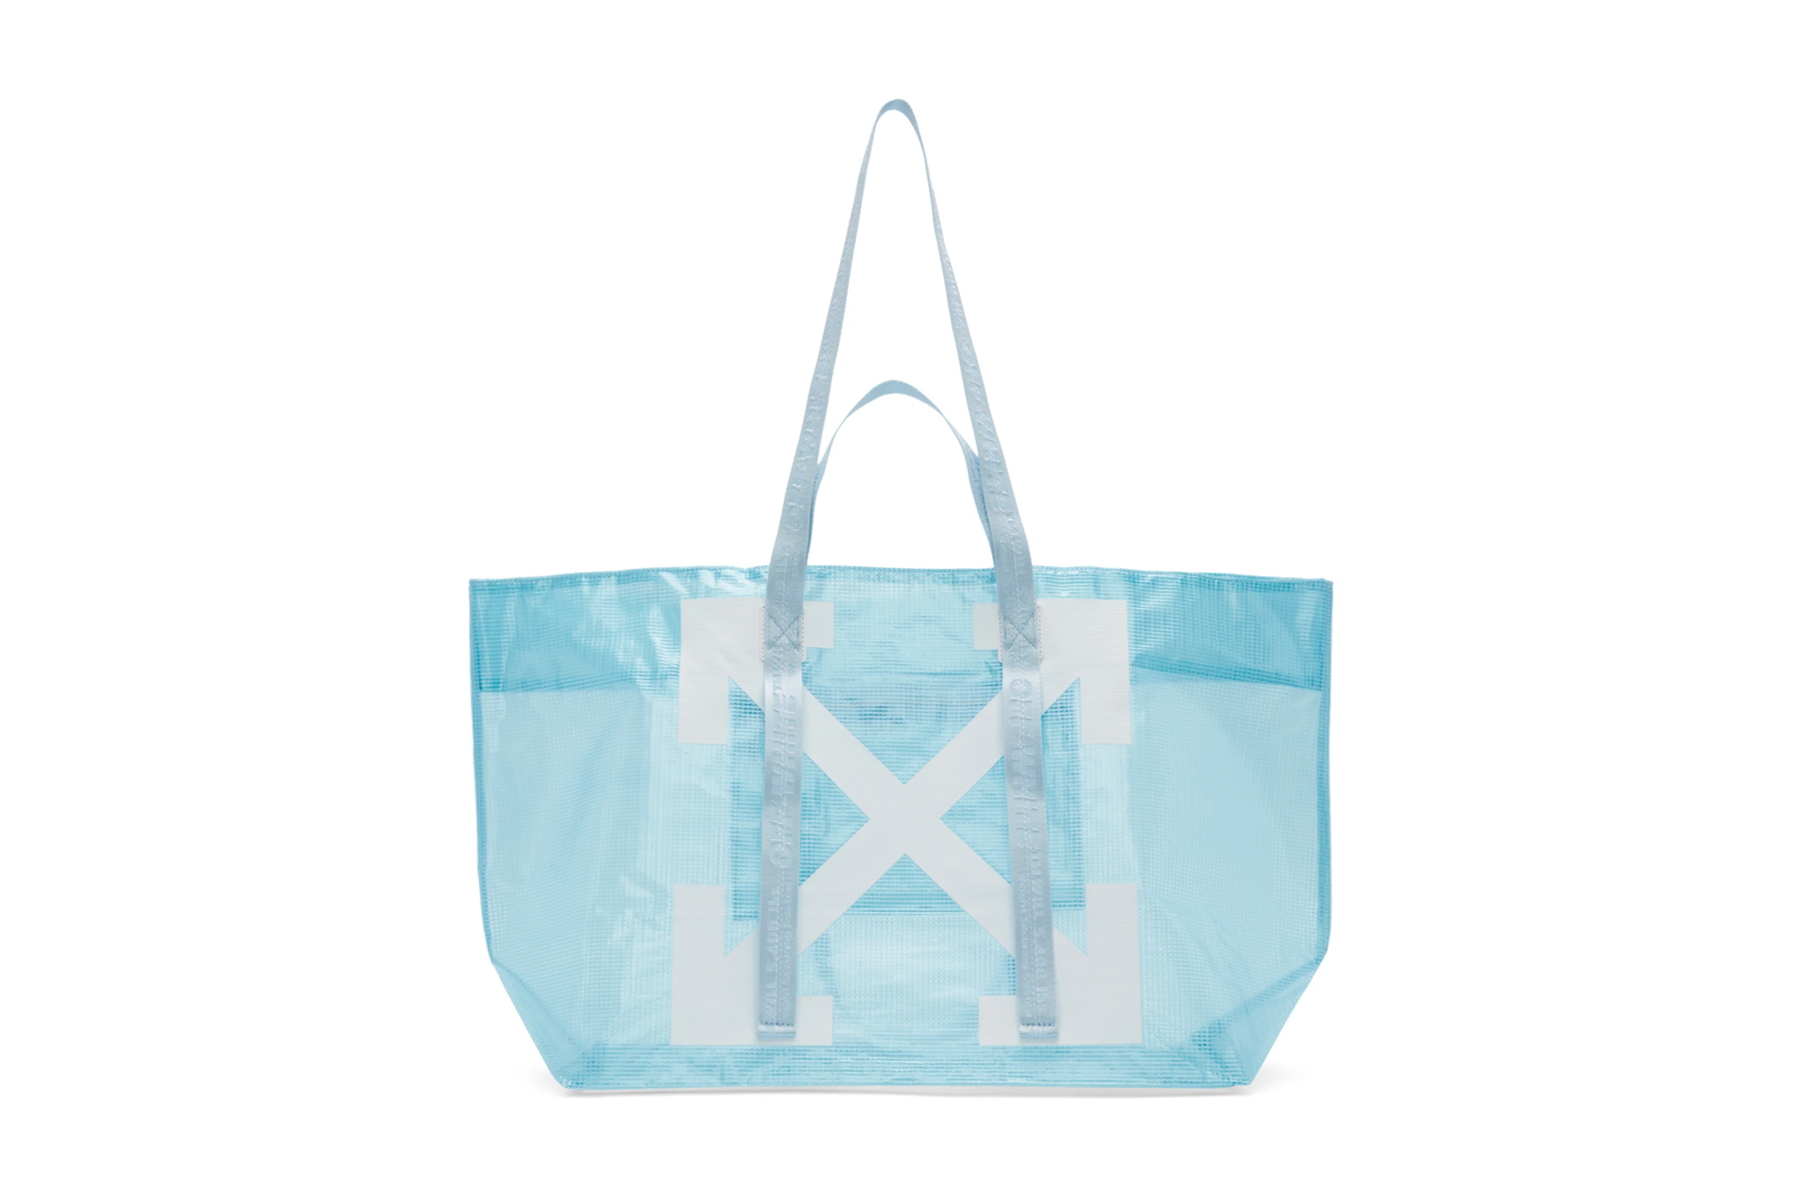 Off-white Inspired Tote Bag Fashionable and Durable Designer